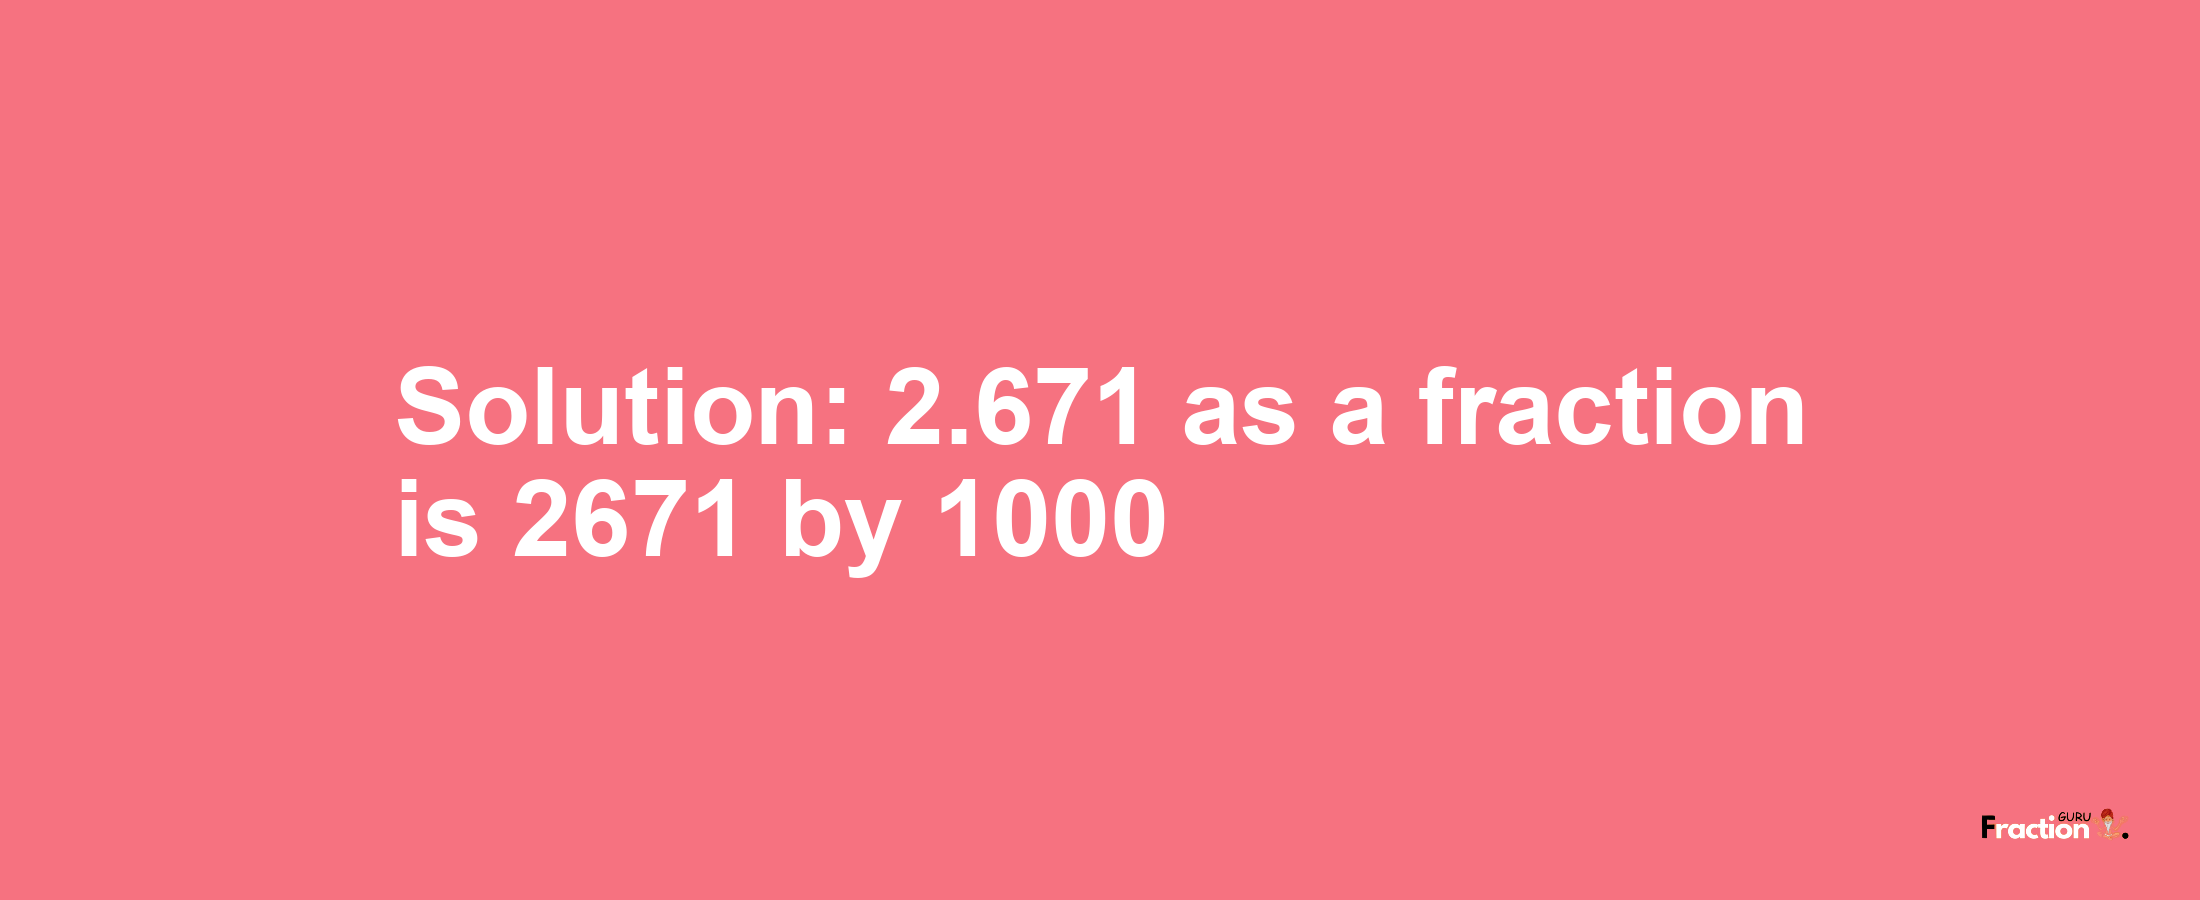 Solution:2.671 as a fraction is 2671/1000